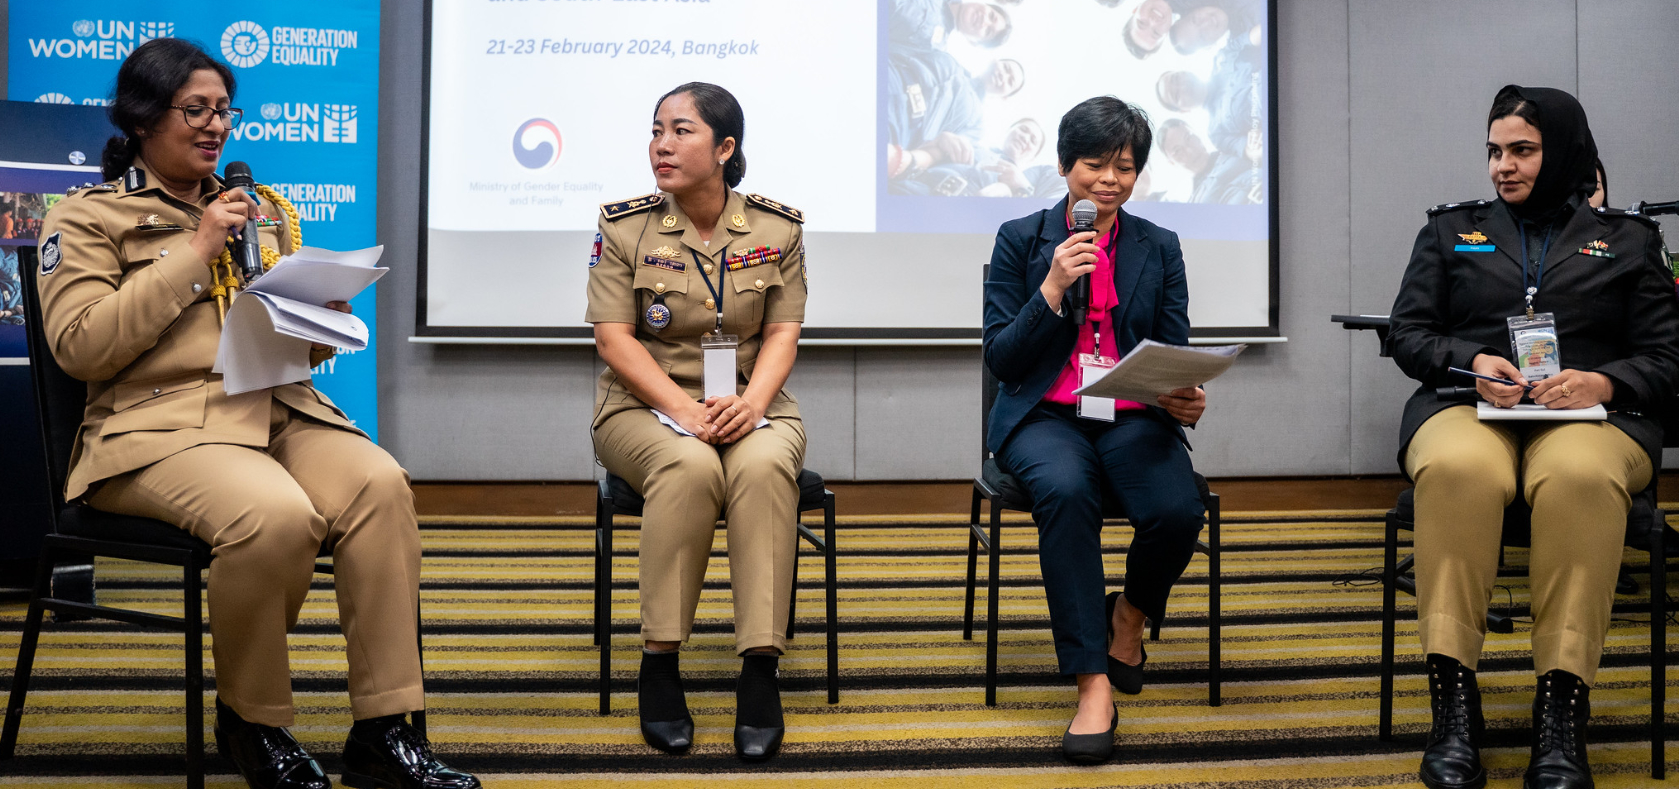 Exchange of promising practices to close gender gap in policing in South and South-East Asia